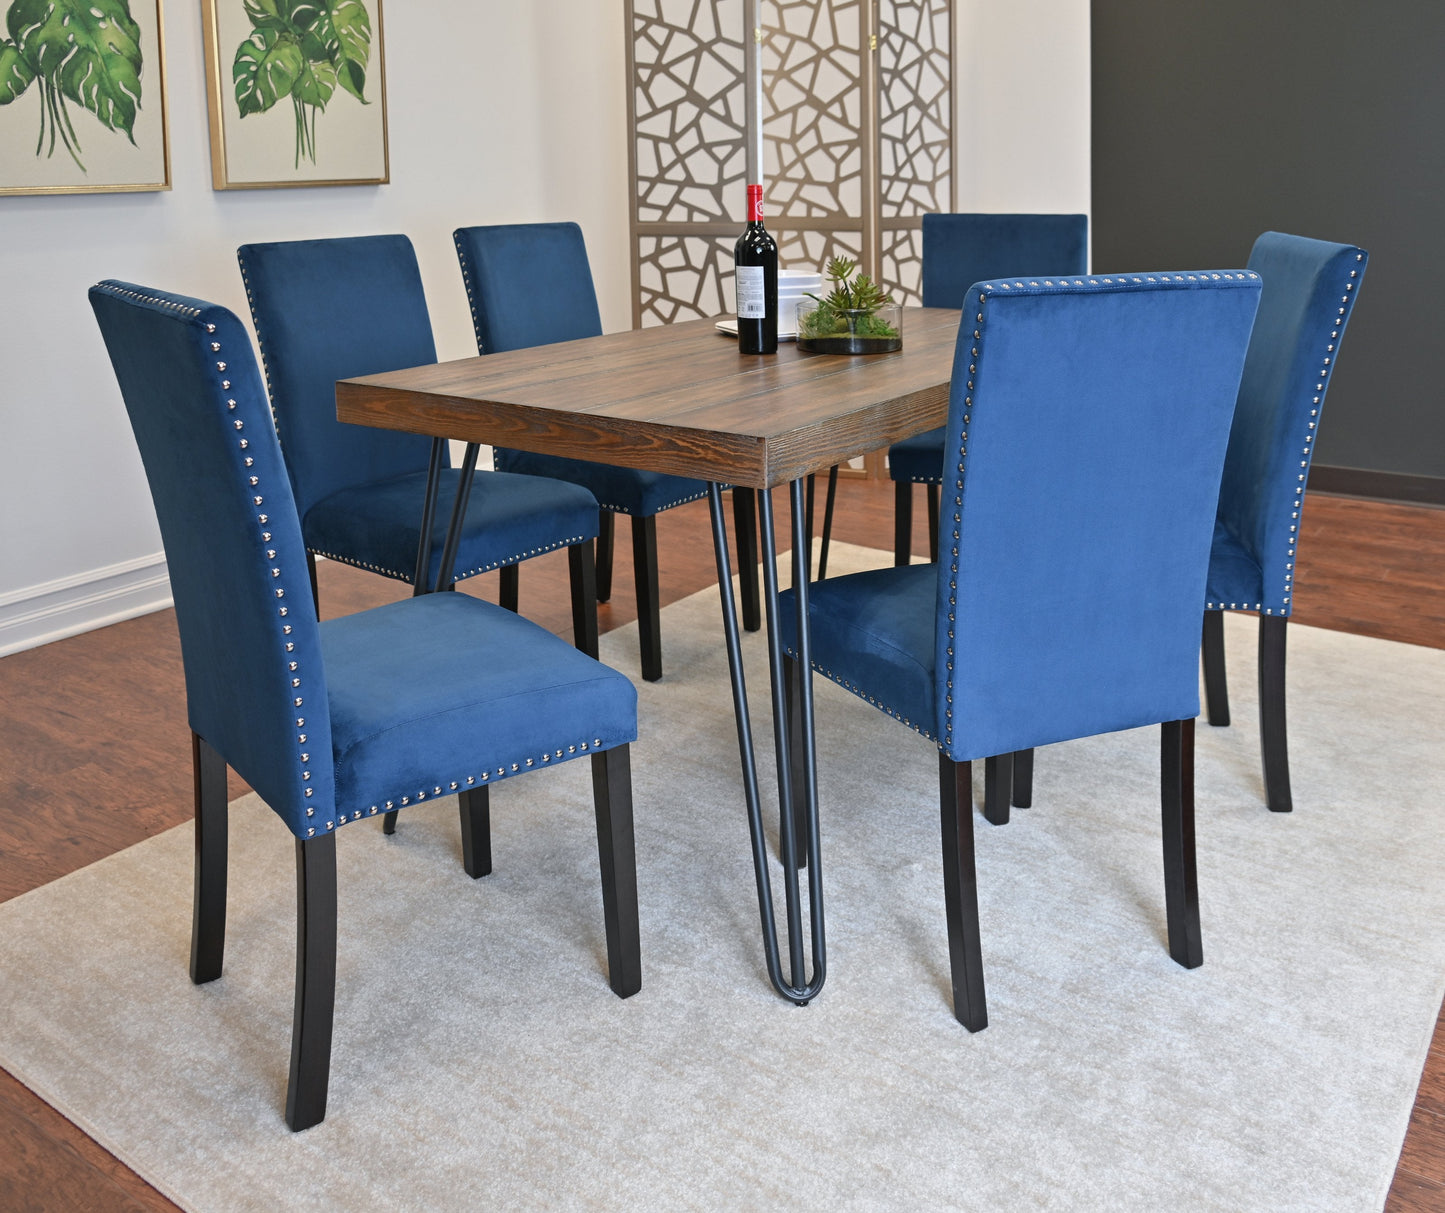 Ashzo 7-Piece Dining Set, Hairpin Dining Table with 6 Chairs, 3 Color Options